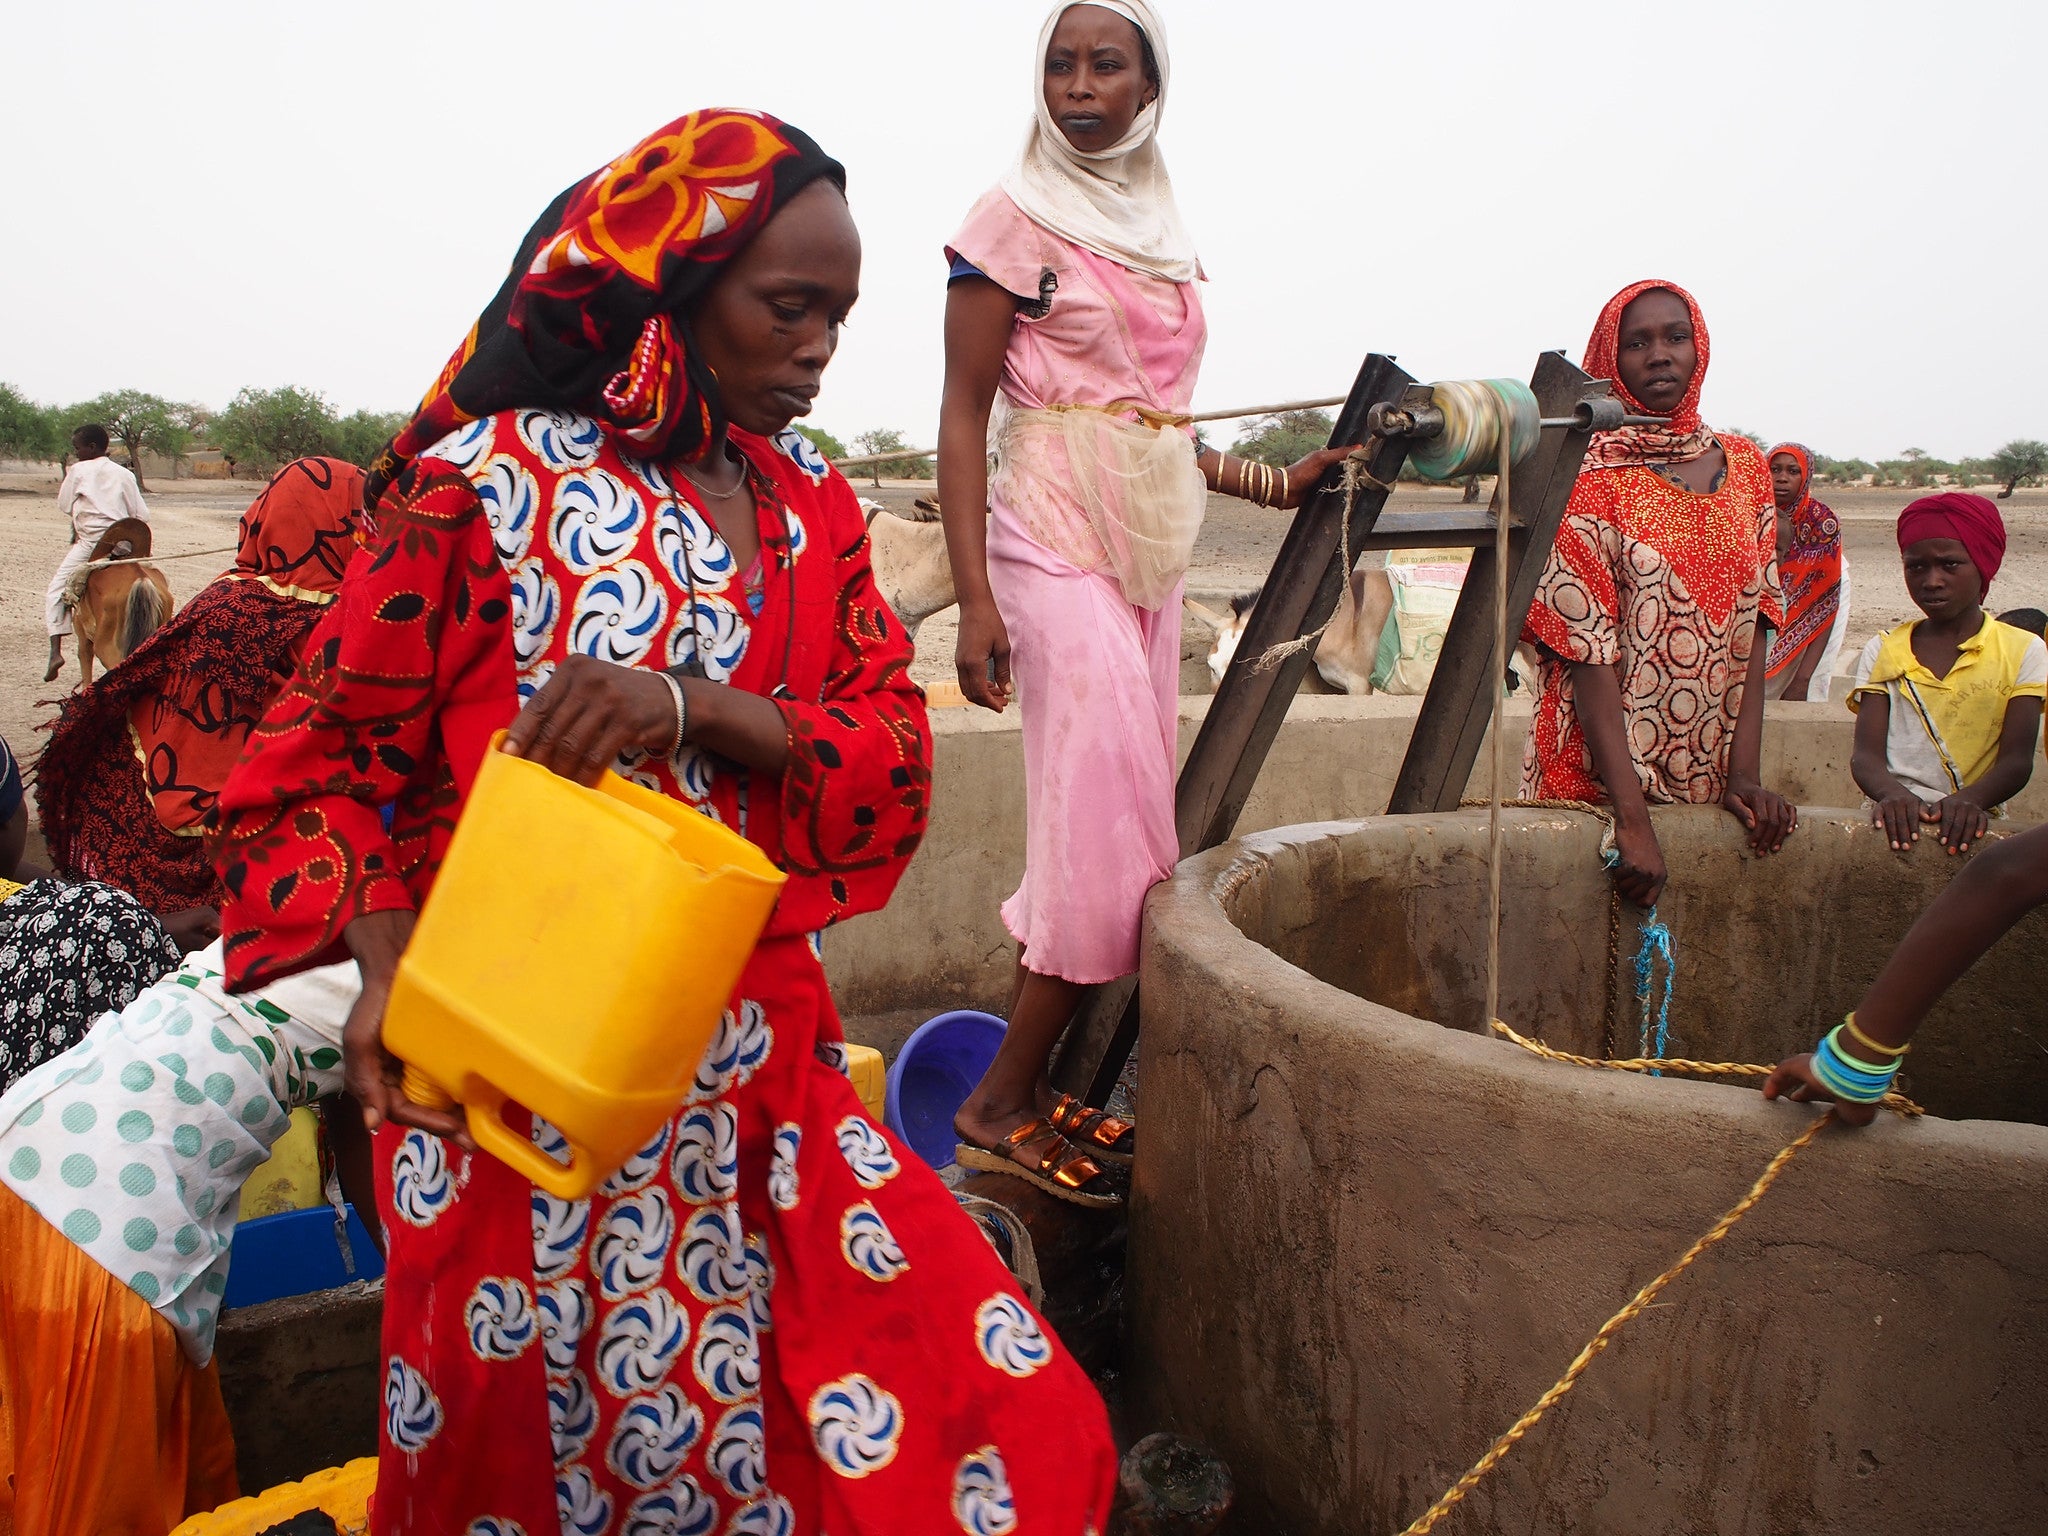 Women at a water well in Chad. Photo credit: Pierre Laborde/Shutterstock